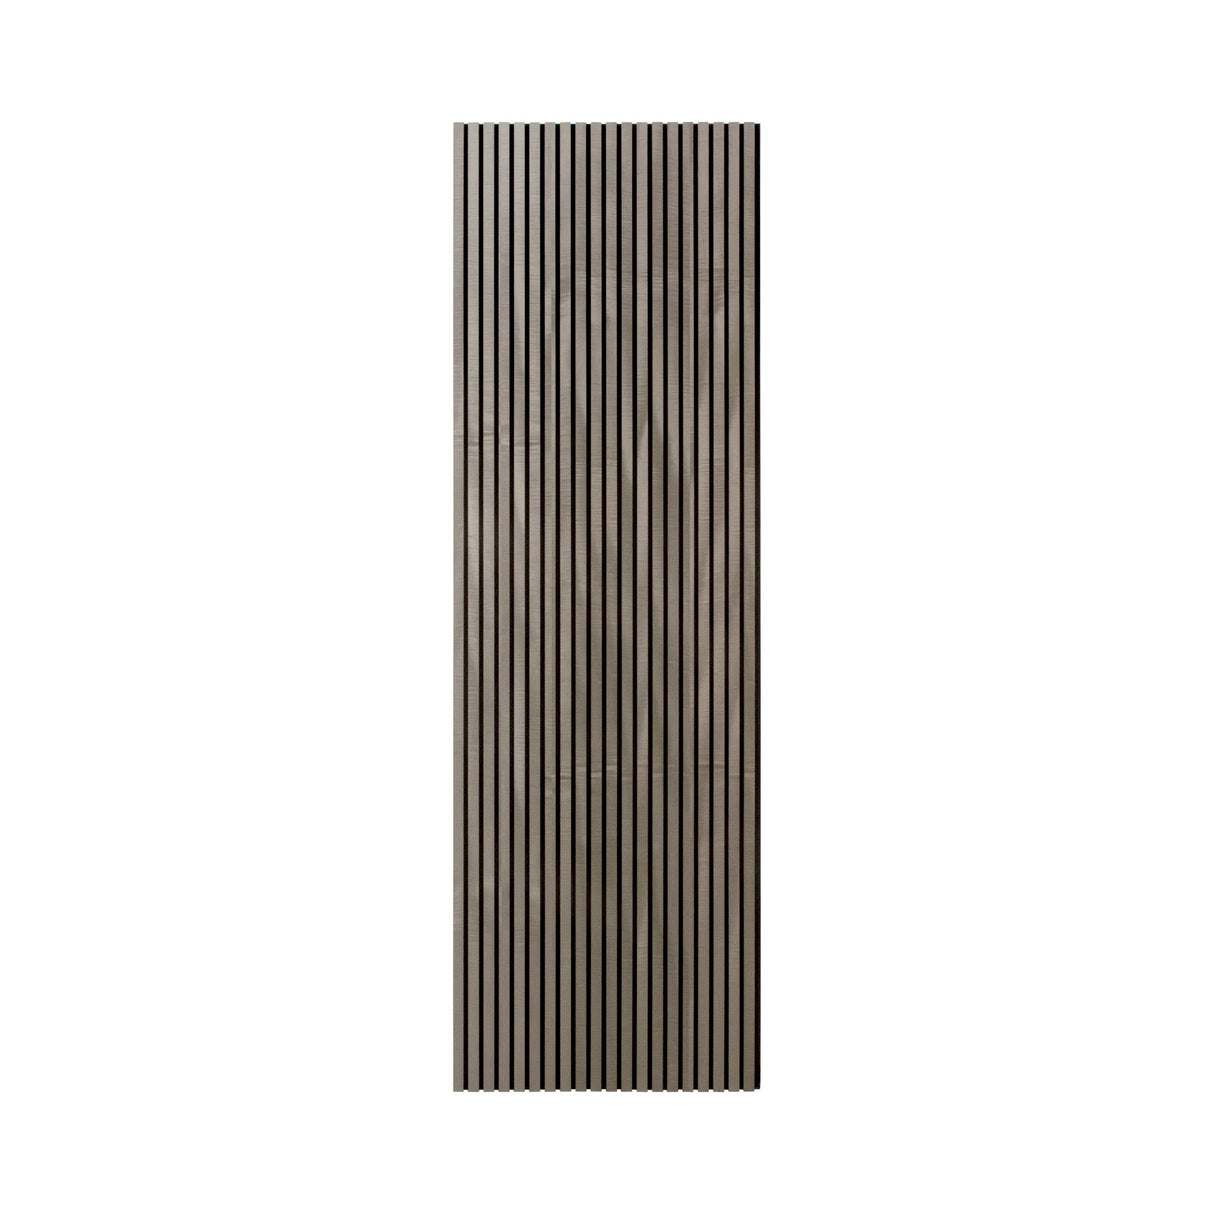 Primacoustic ECOScapes Slat Wall Panel, 32 x 96-Inch, Fog 2-Pack